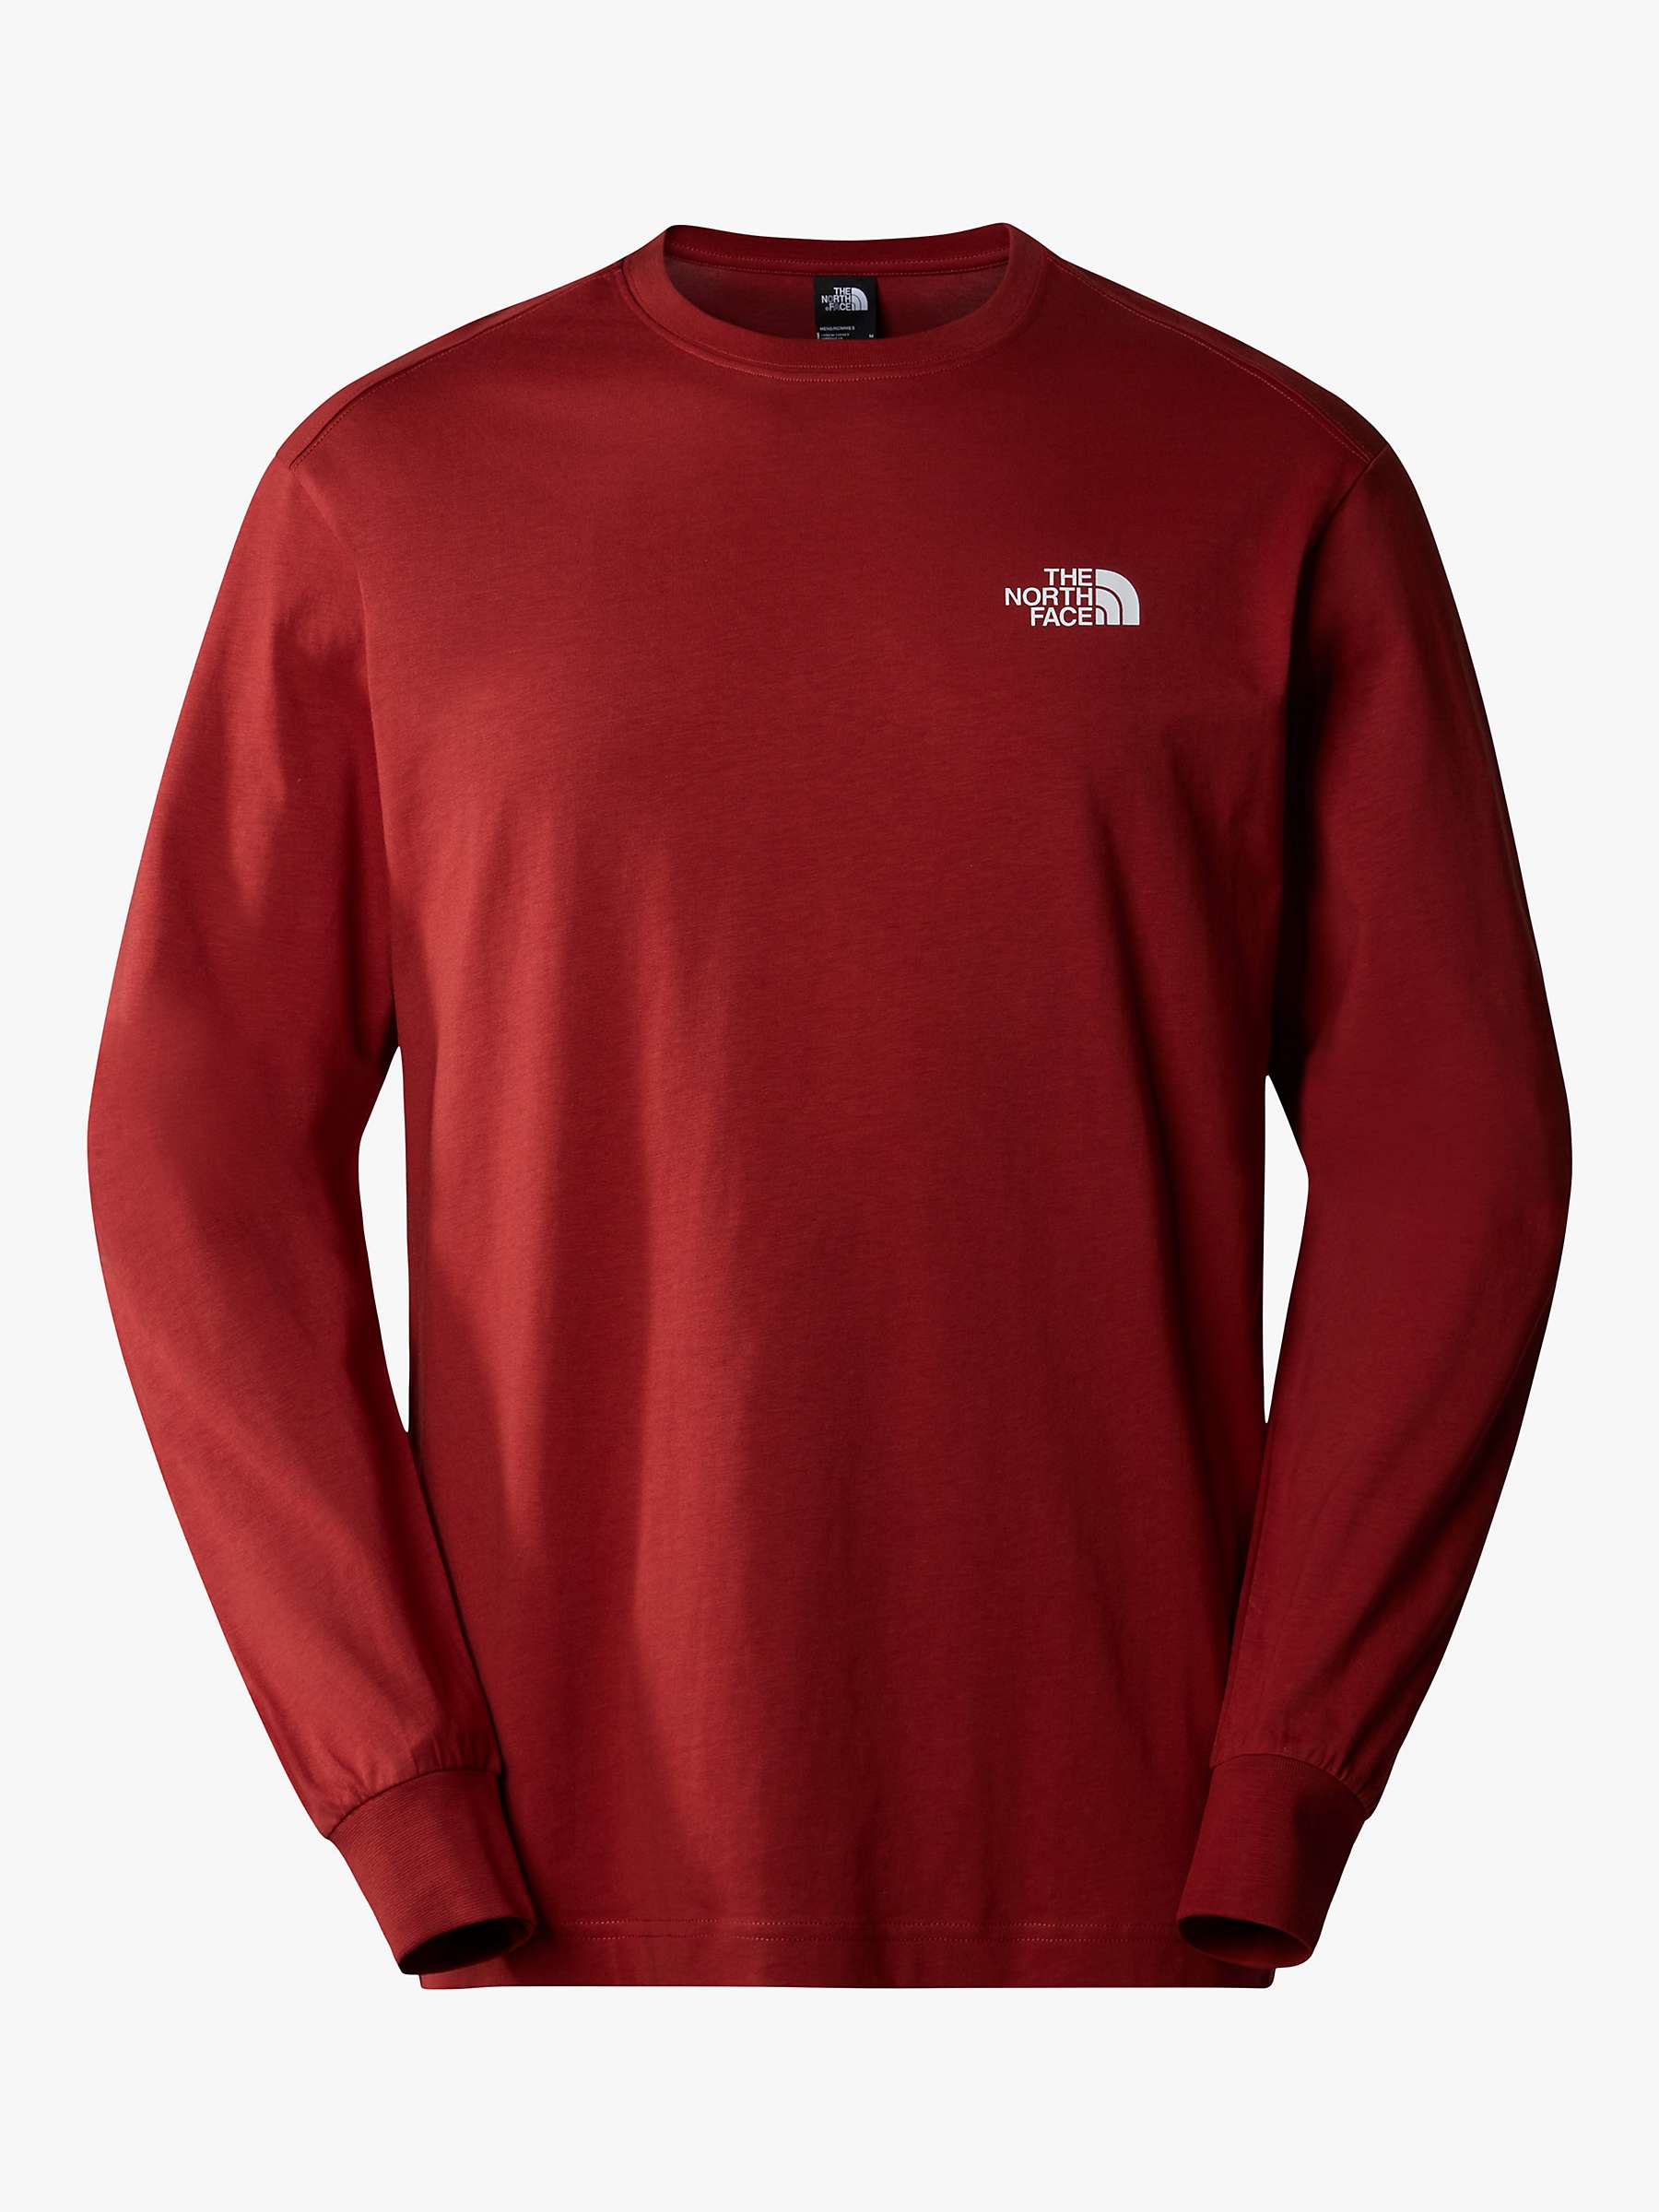 Buy The North Face Outdoor Back Graphic T-Shirt, Iron Red Online at johnlewis.com